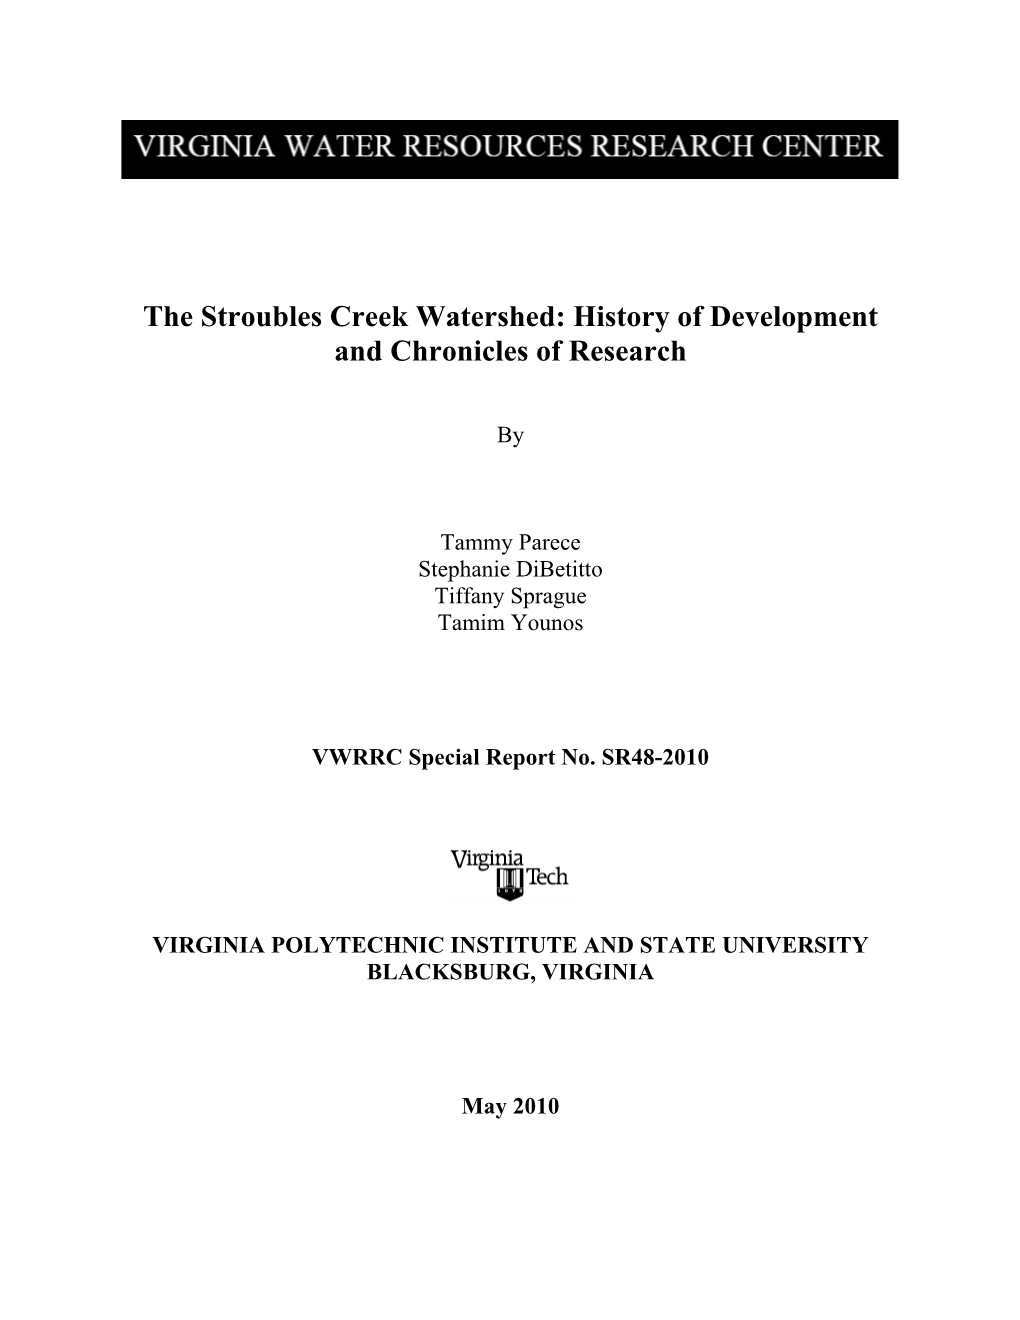 The Stroubles Creek Watershed: History of Development and Chronicles of Research